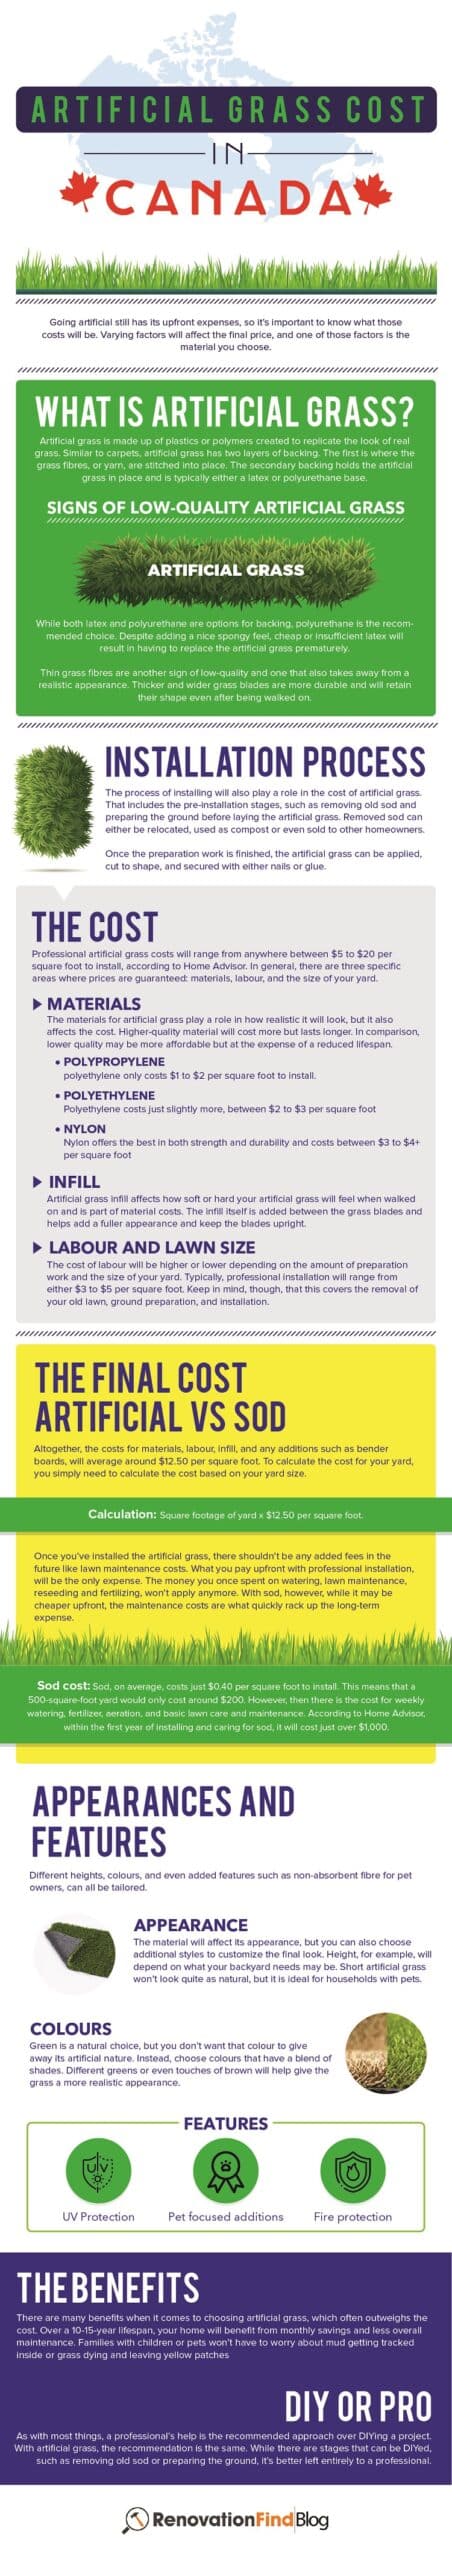 Infographic - Artificial Grass cost